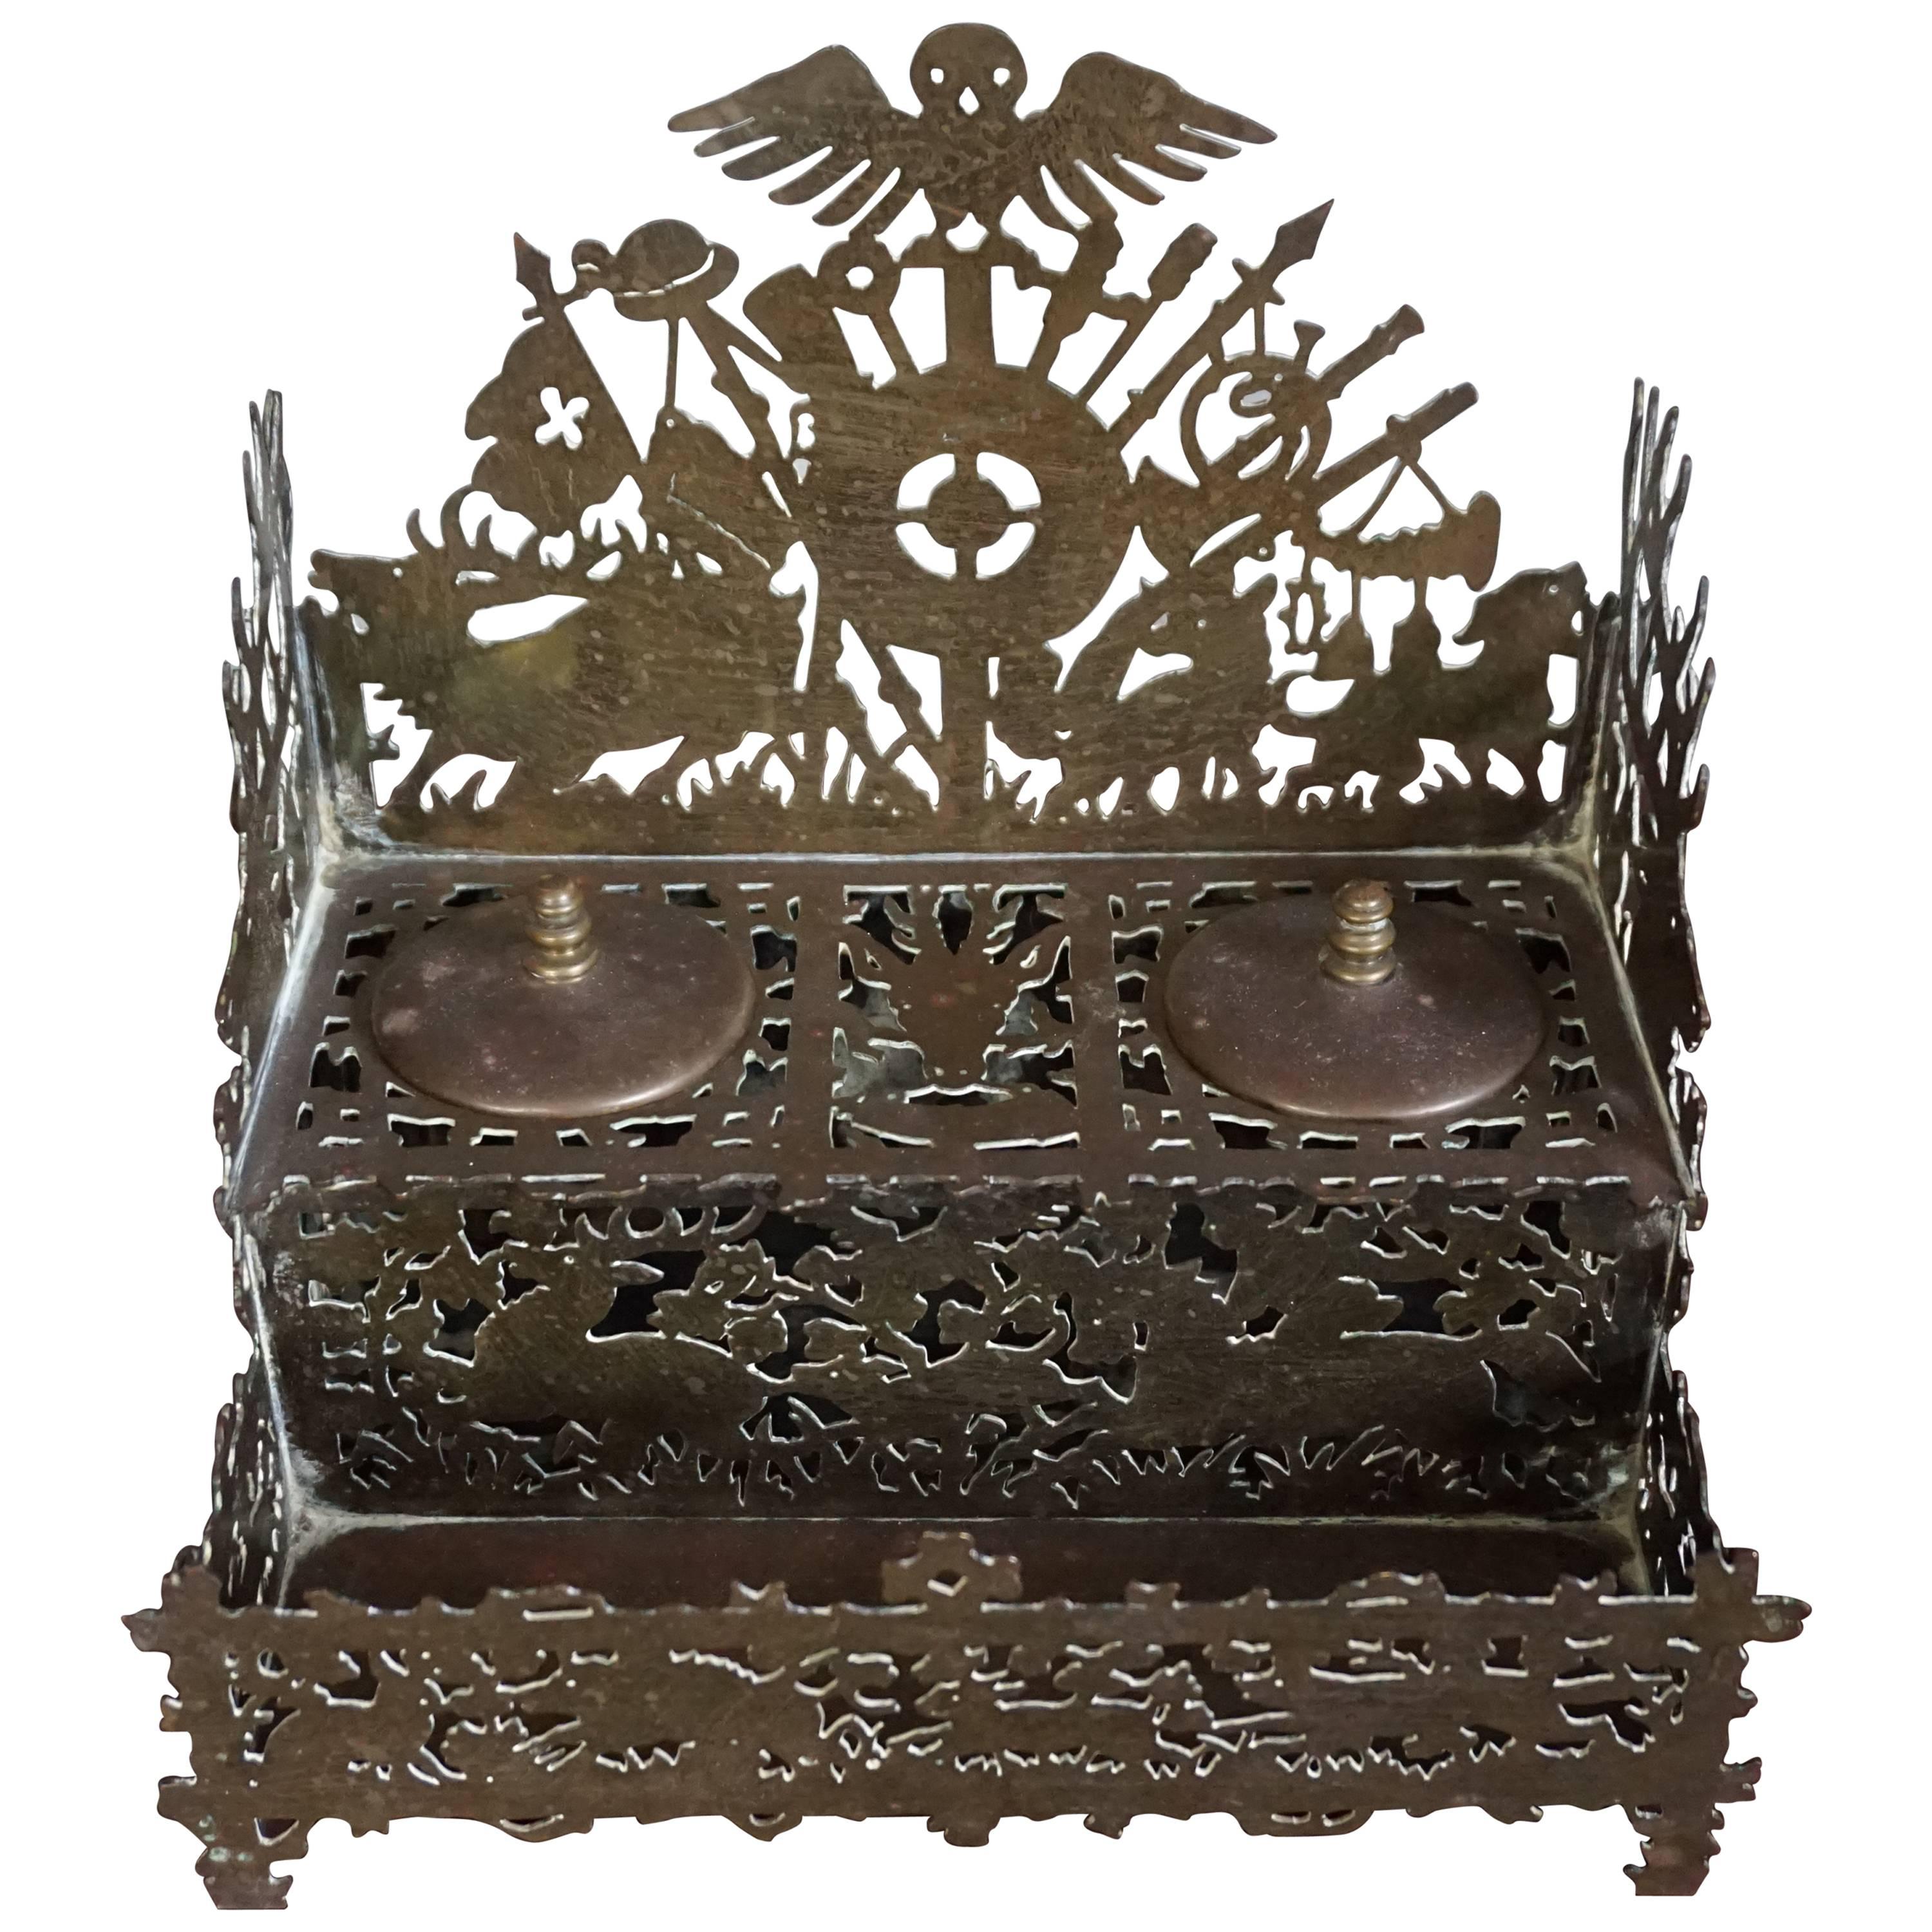 Unique & Intricate Swiss Black Forest Style Hunting Ink Stand Original Inkwells